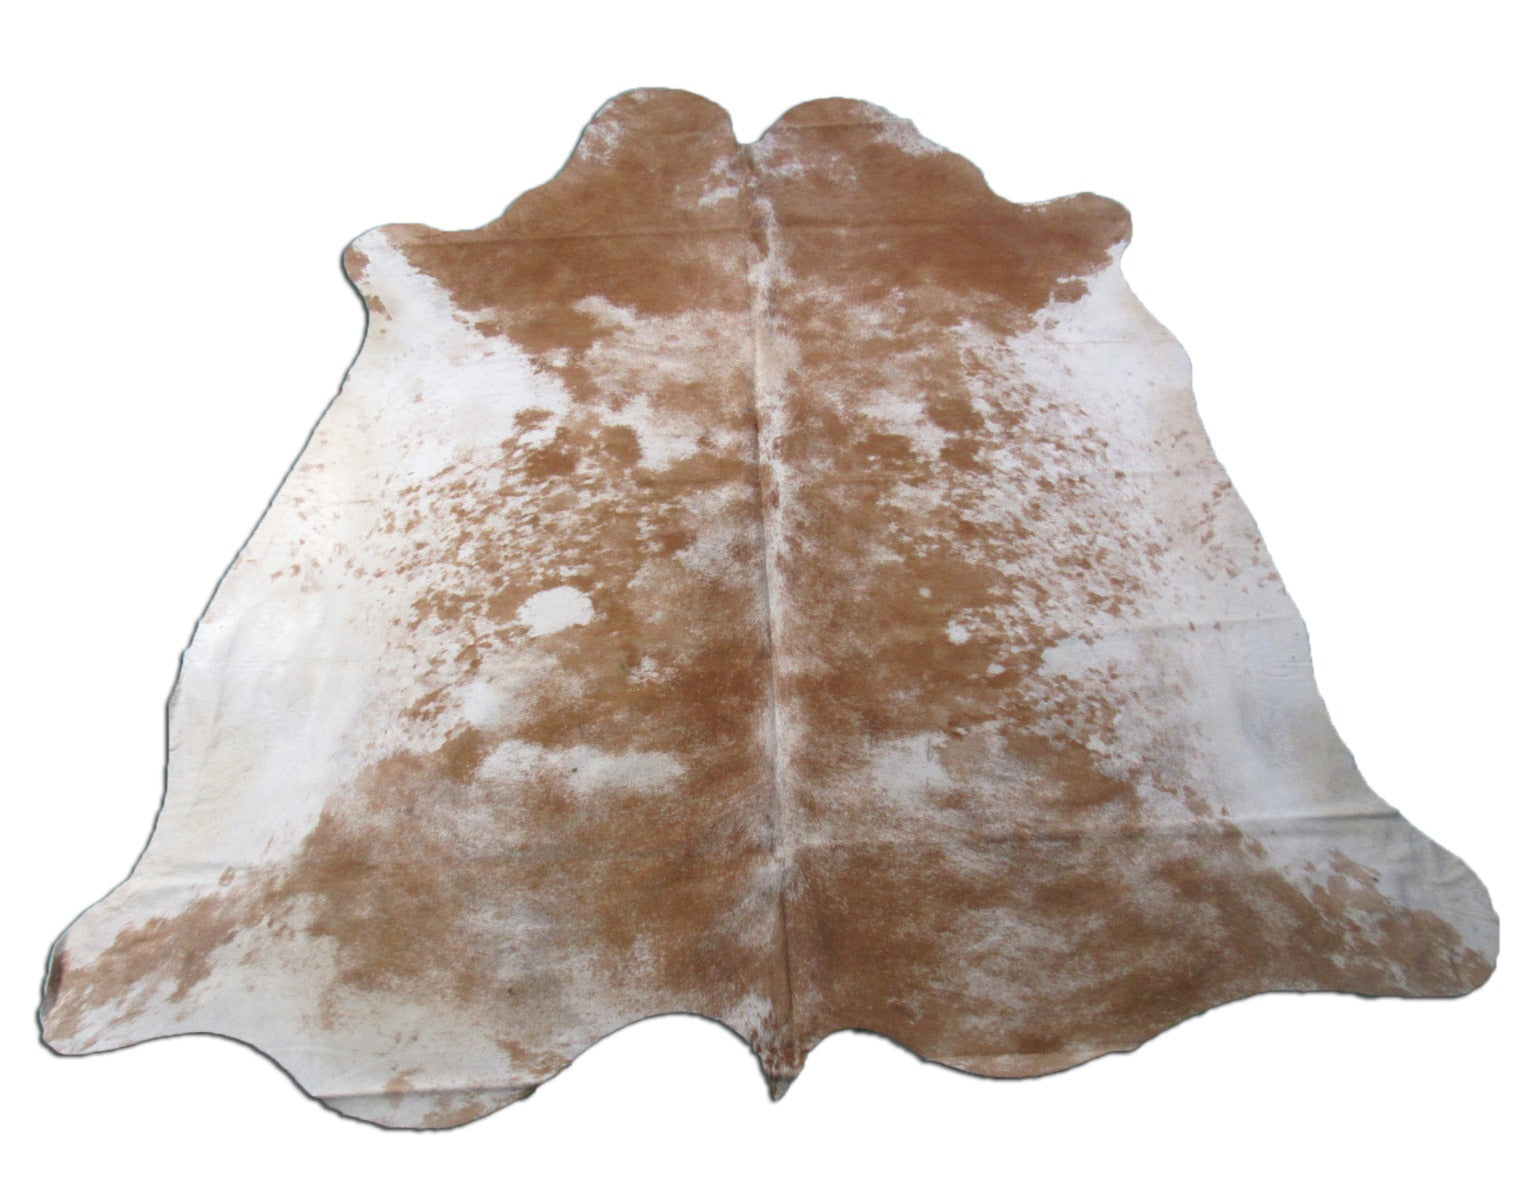 Brown & White Speckled Cowhide Rug - Size: 7' x 7' M-1396